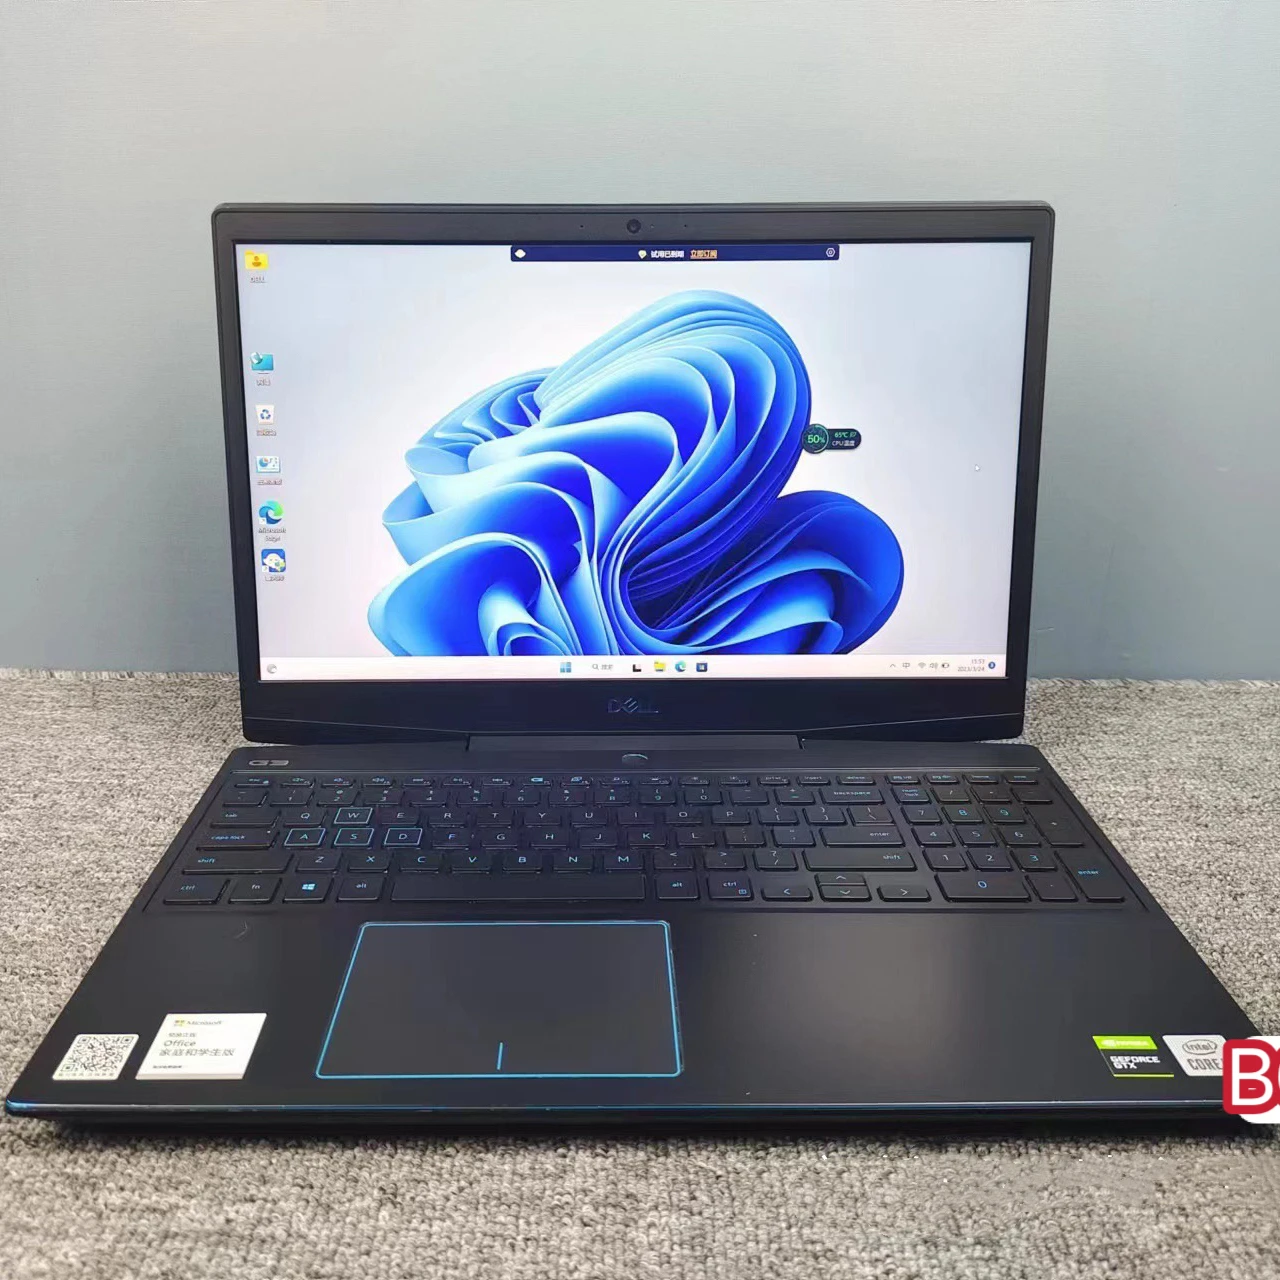 

Best Offer Raiders For dell G3-3500 i7-10750H 16GB 512 SSD GTX 1650 (4G) Gaming Laptop